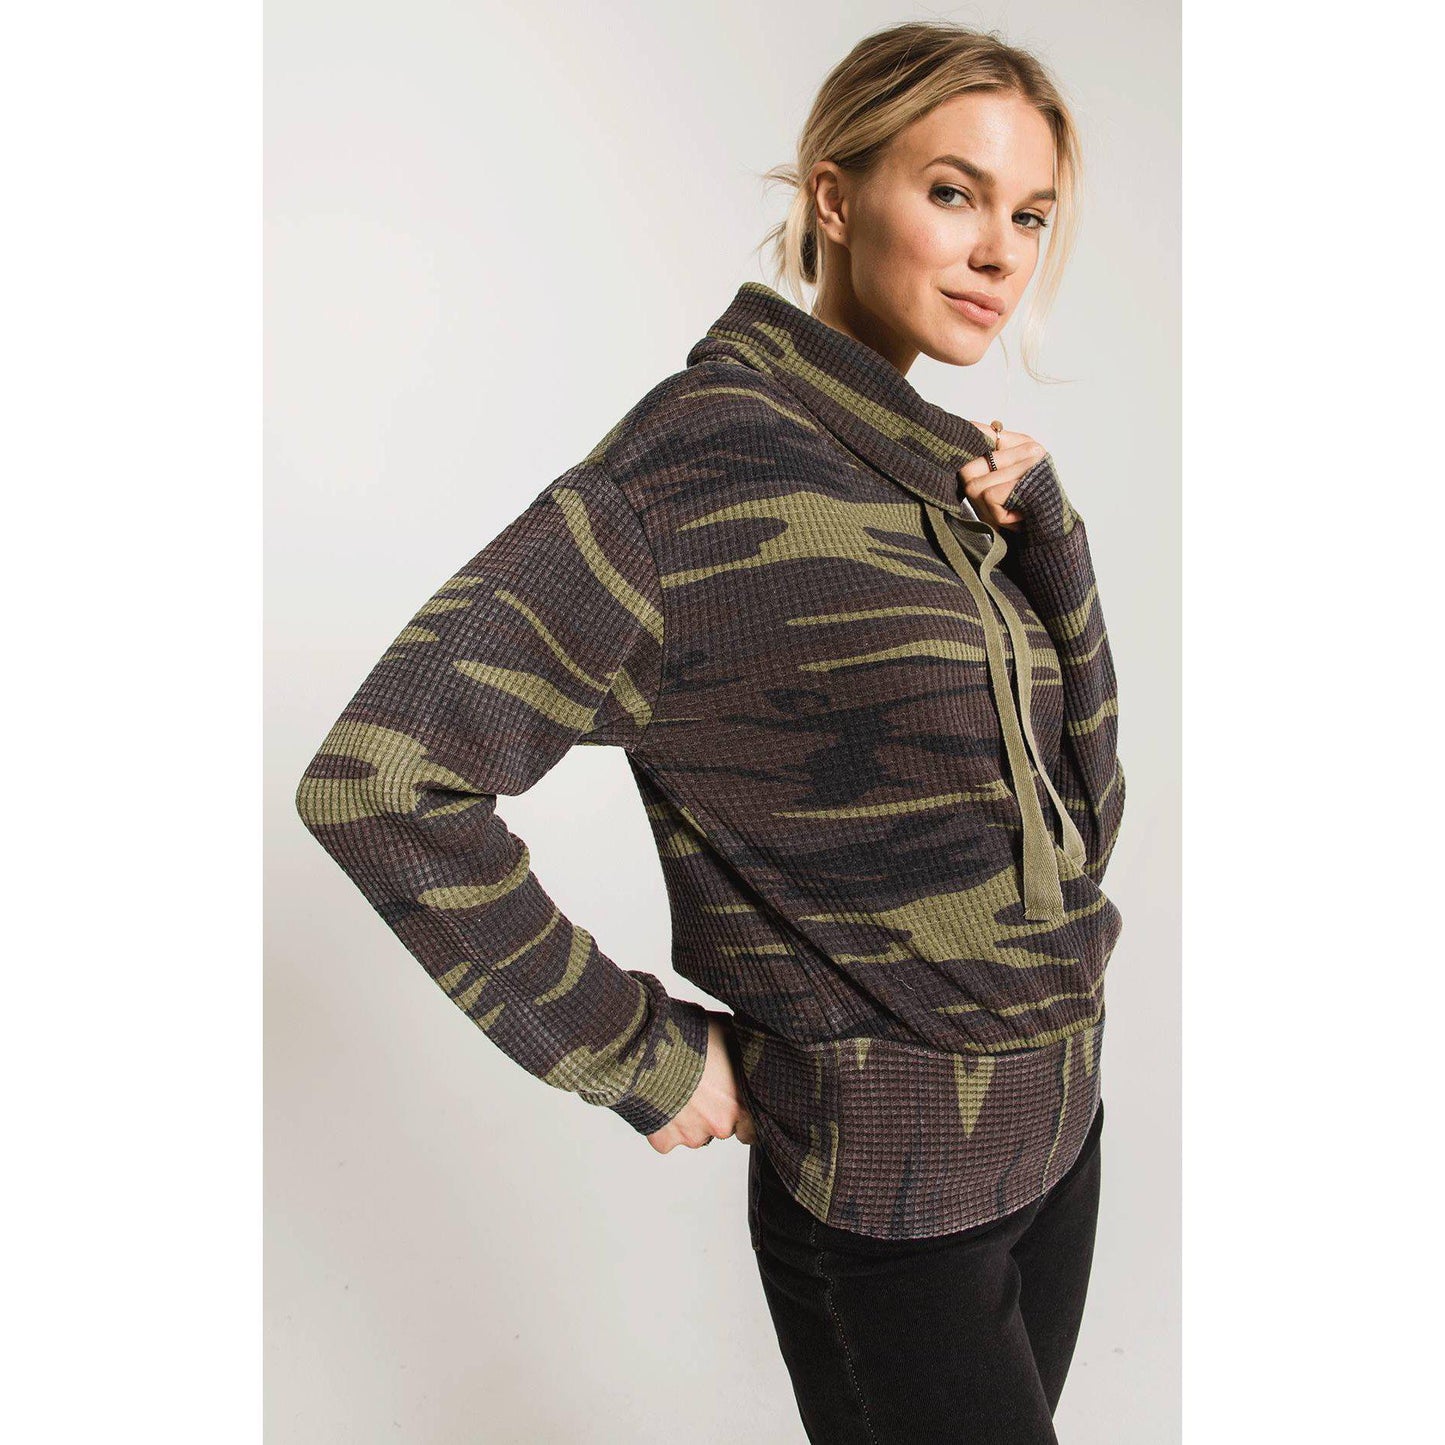 The Camo Cowl Neck Thermal Top